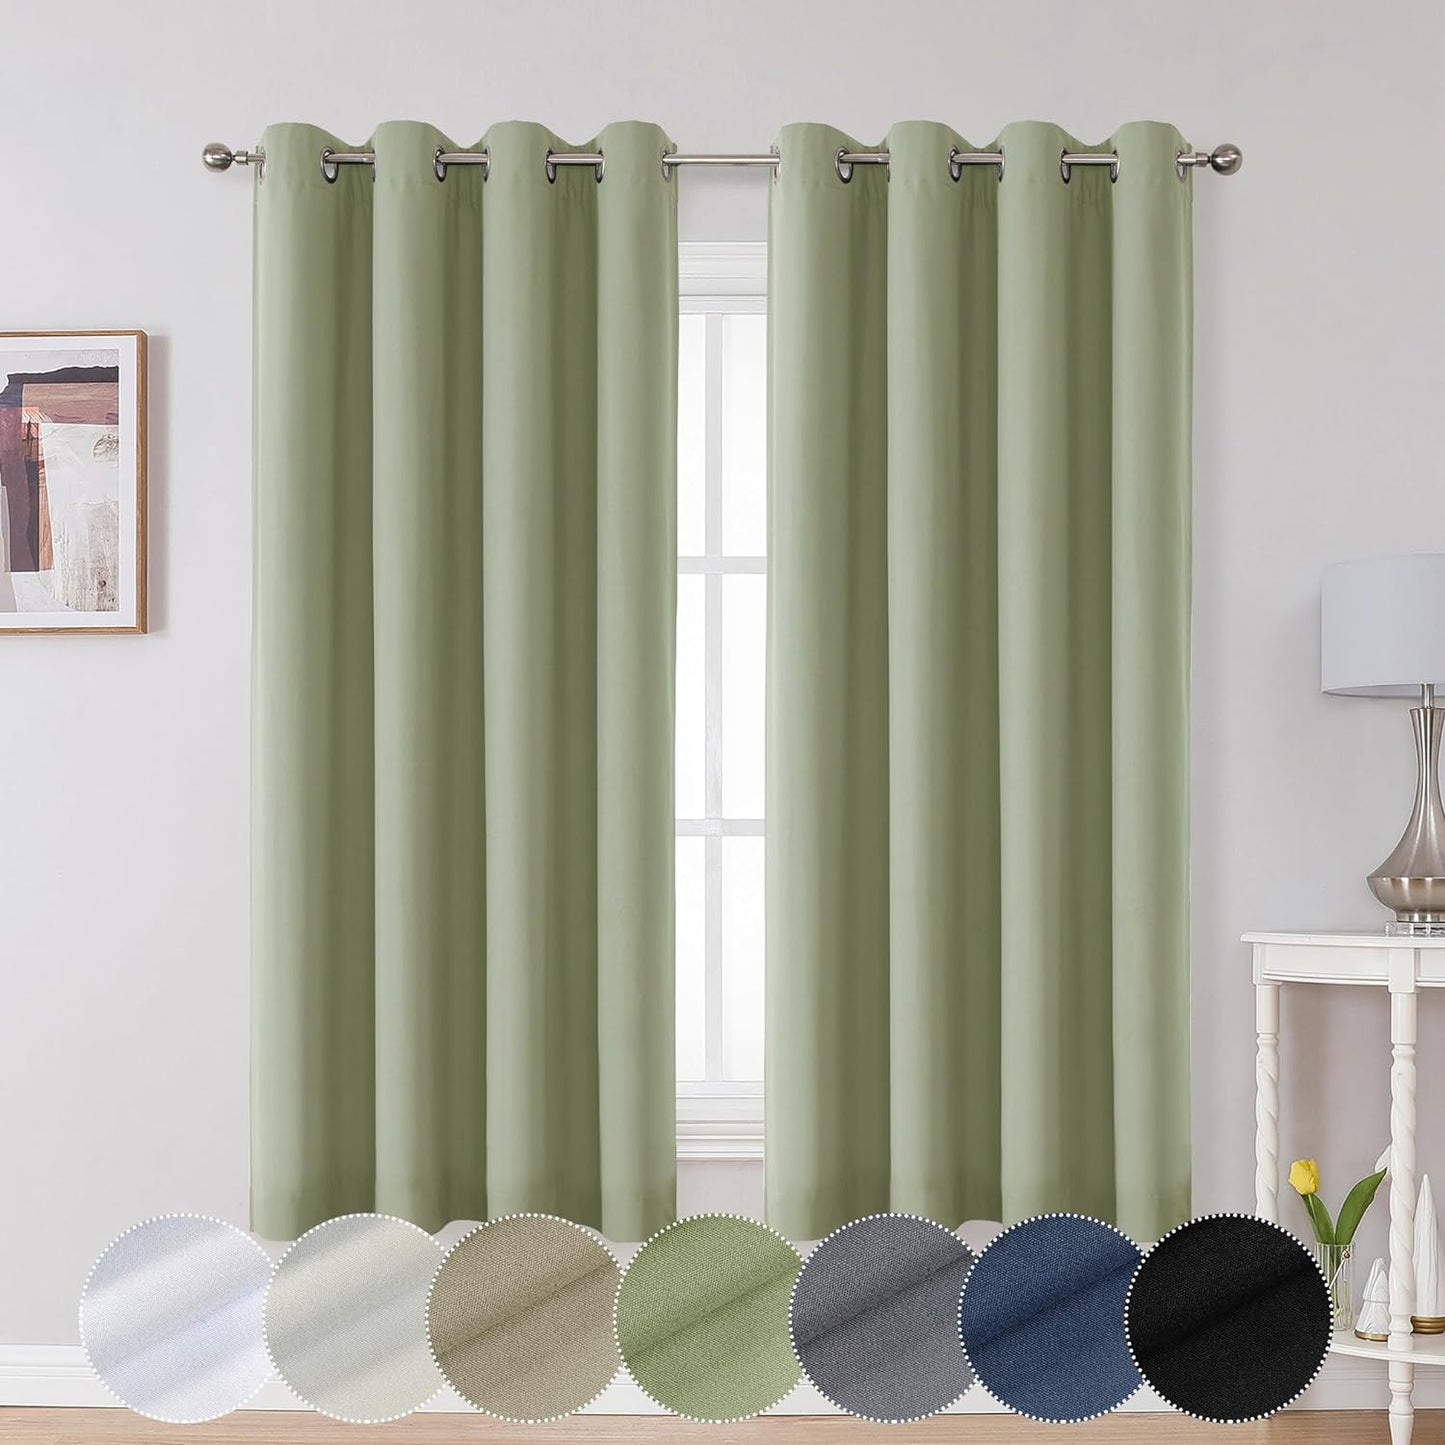 OWENIE Maya 100% Blackout Curtains 84 Inch Length 2 Panels Set, Greyish White Solid Heavy Thermal Insulated Grommets Curtains for Bedroom & Living Room, 2 Panels (Each 52 W X 84 L,Greyish White)  OWENIE Sage Green 52W X 63L 